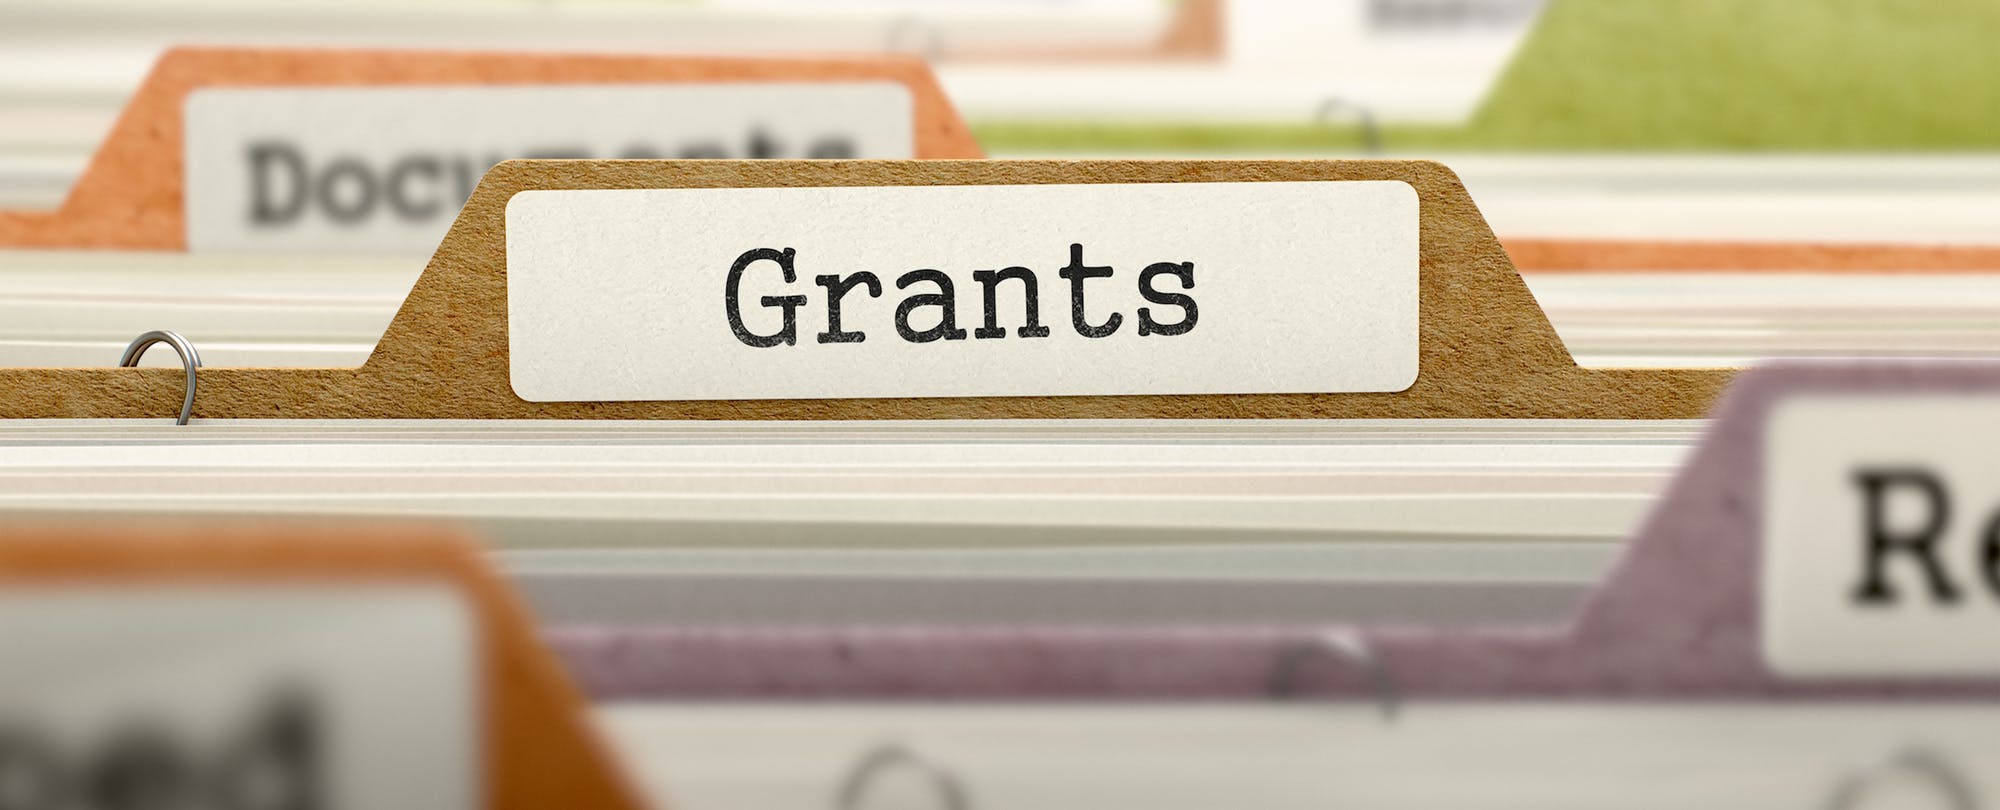 Closeup of hanging file tabs. A tab with the word "Grants" typed on a label is the main focus.